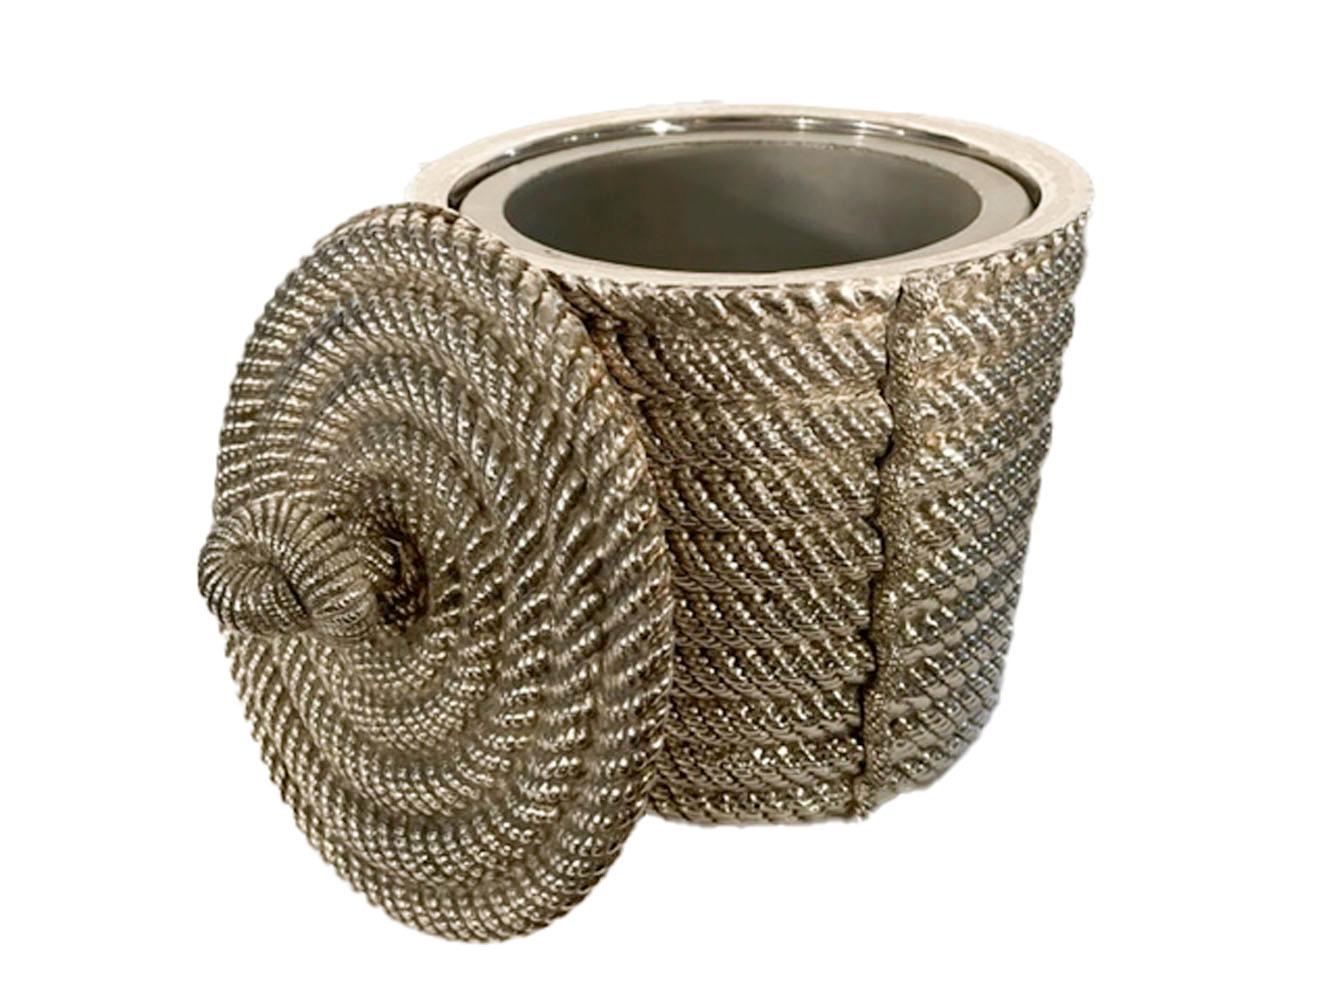 Mid-Century Modern Vintage Silver Plate Ice Bucket Formed as a Coil of Rope by Valenti and Tongs